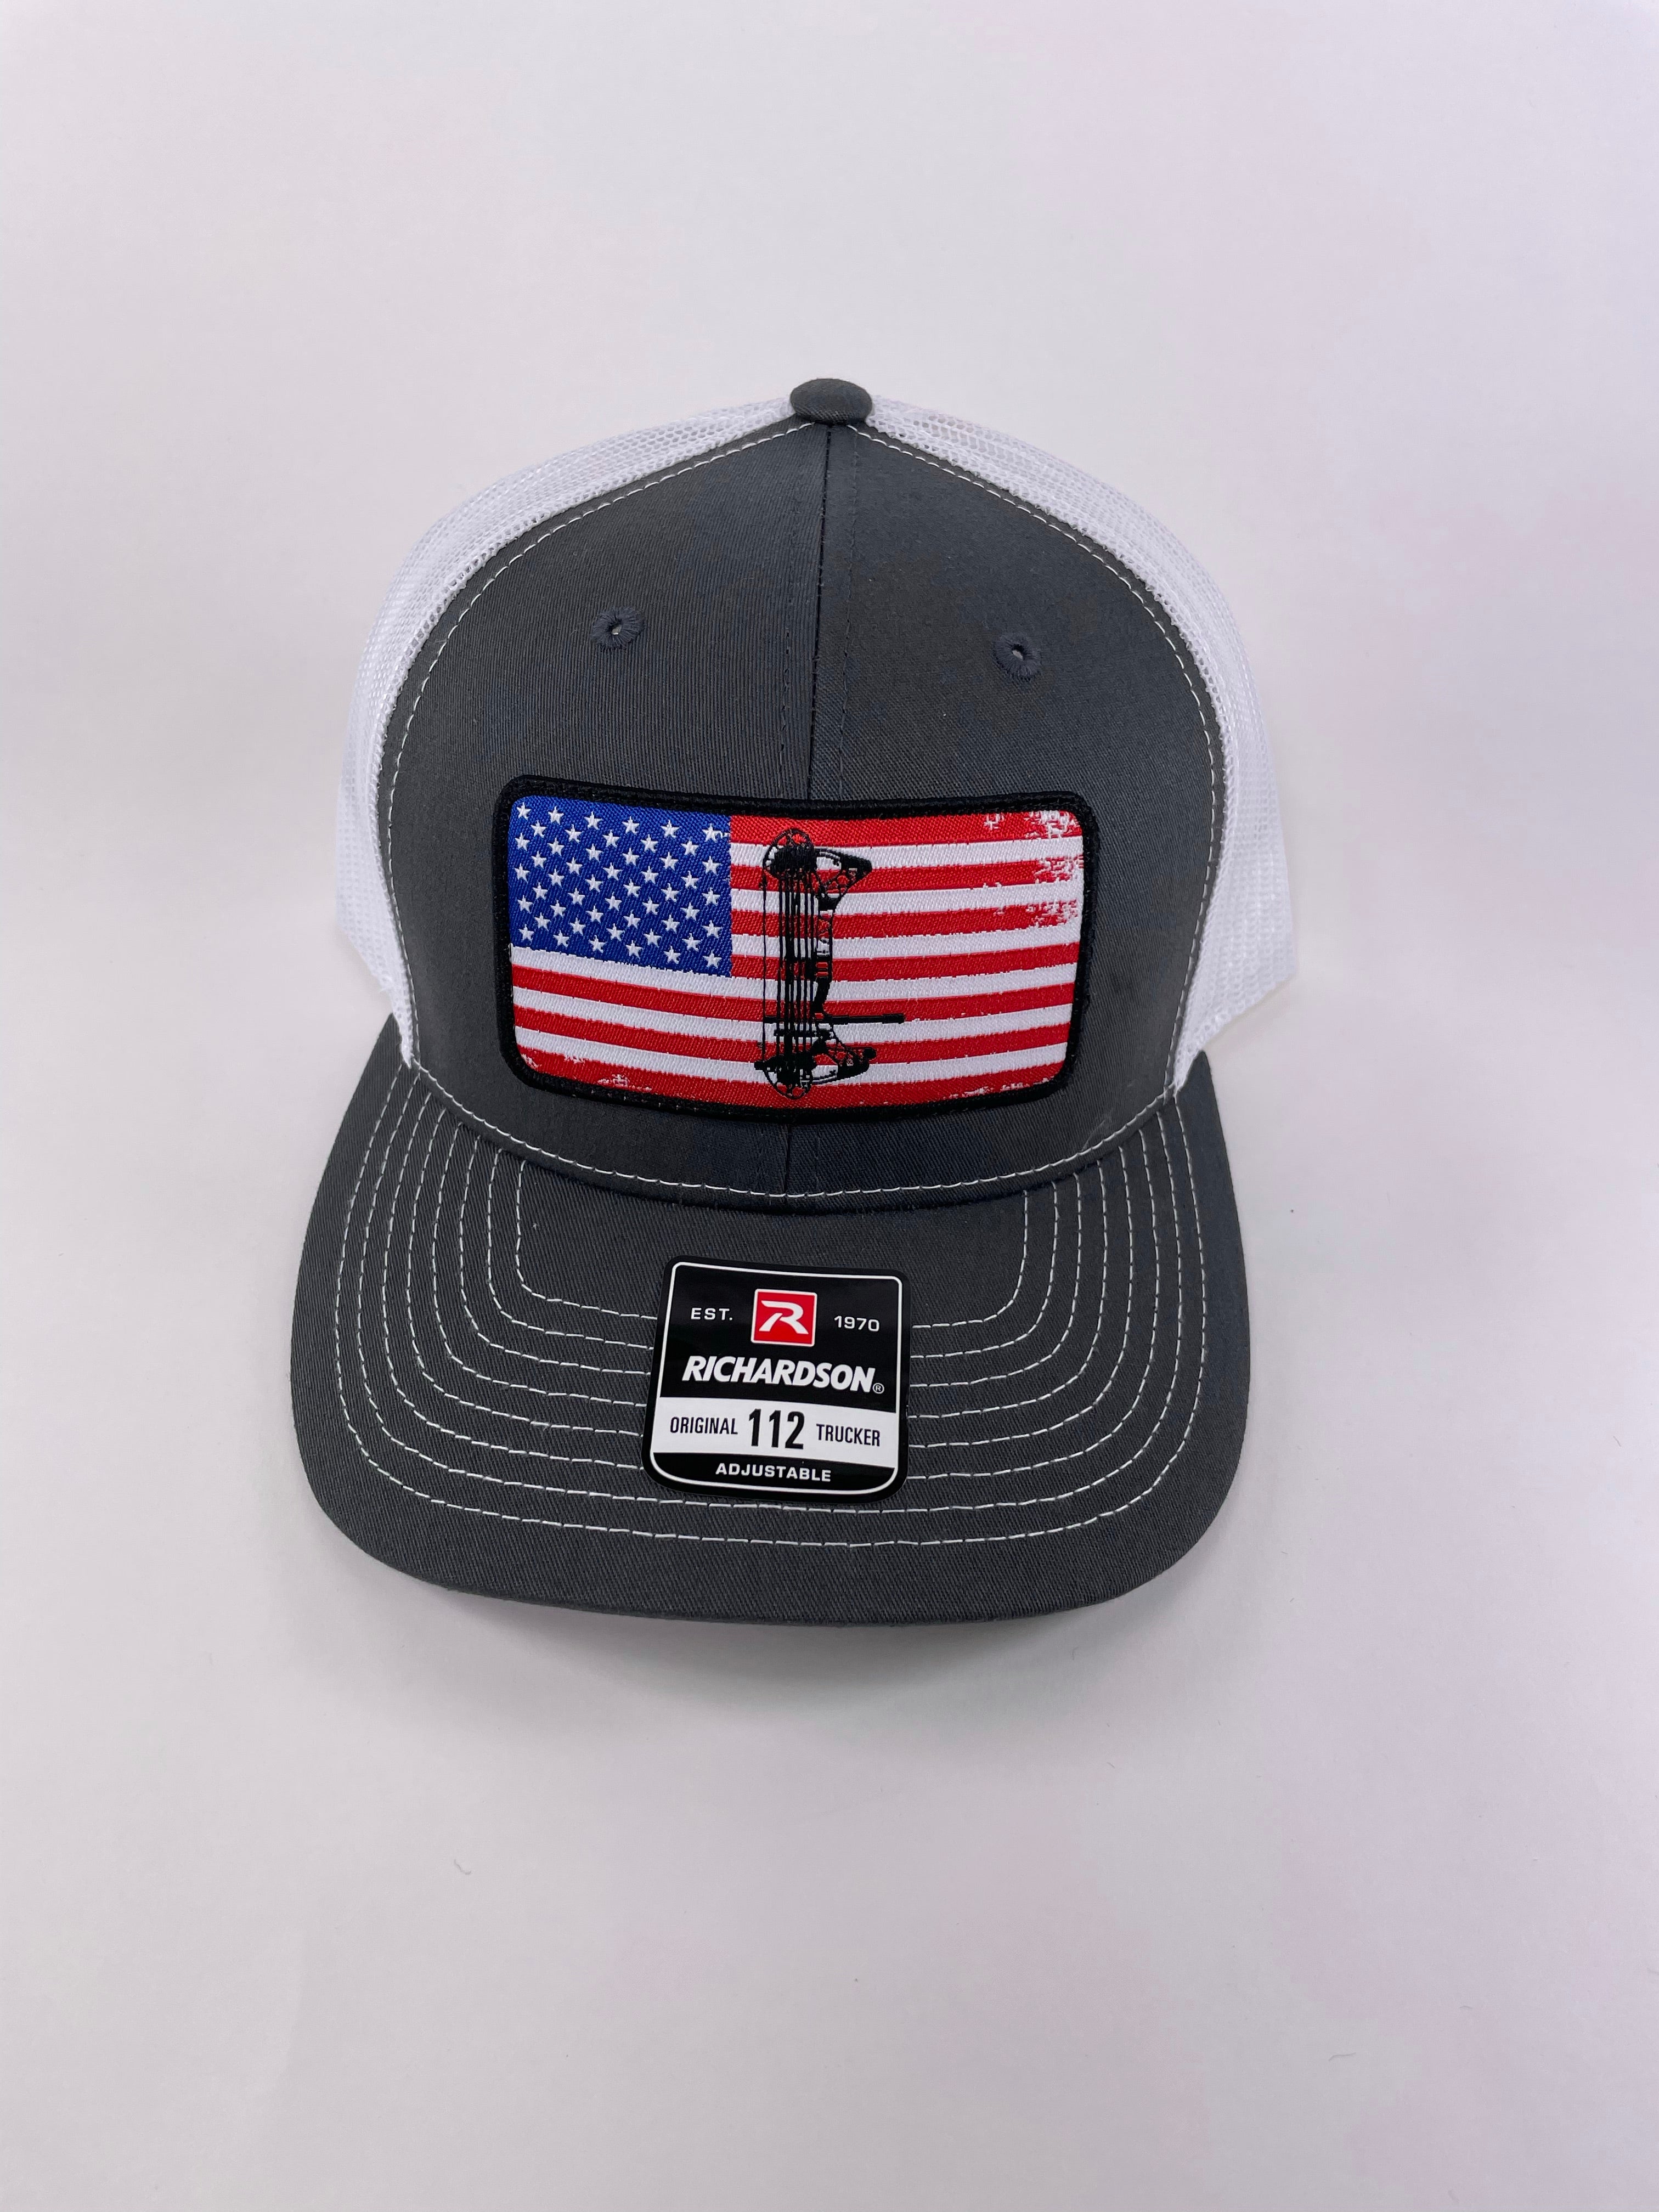 BOW AMERICA - GREY/WHITE SNAP BACK HAT